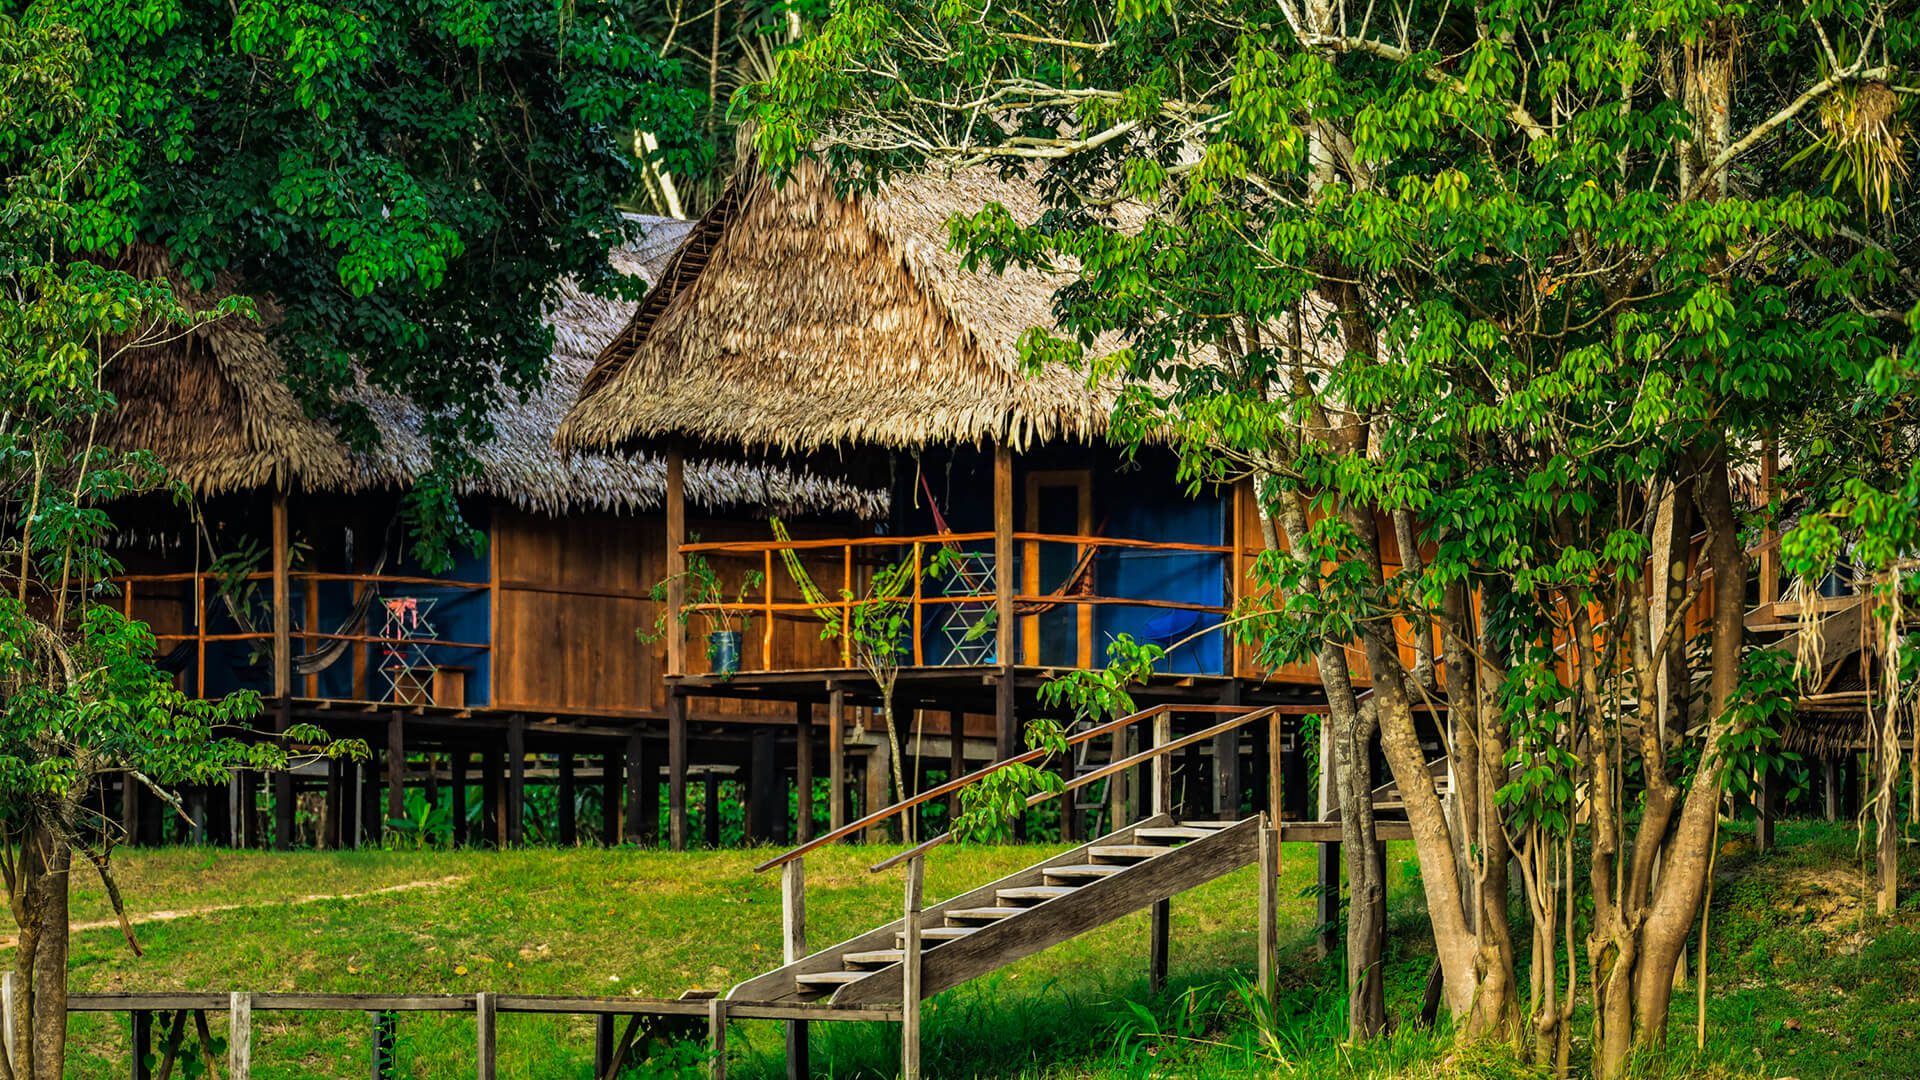 A first view of a jungle river lodge near Iquitos